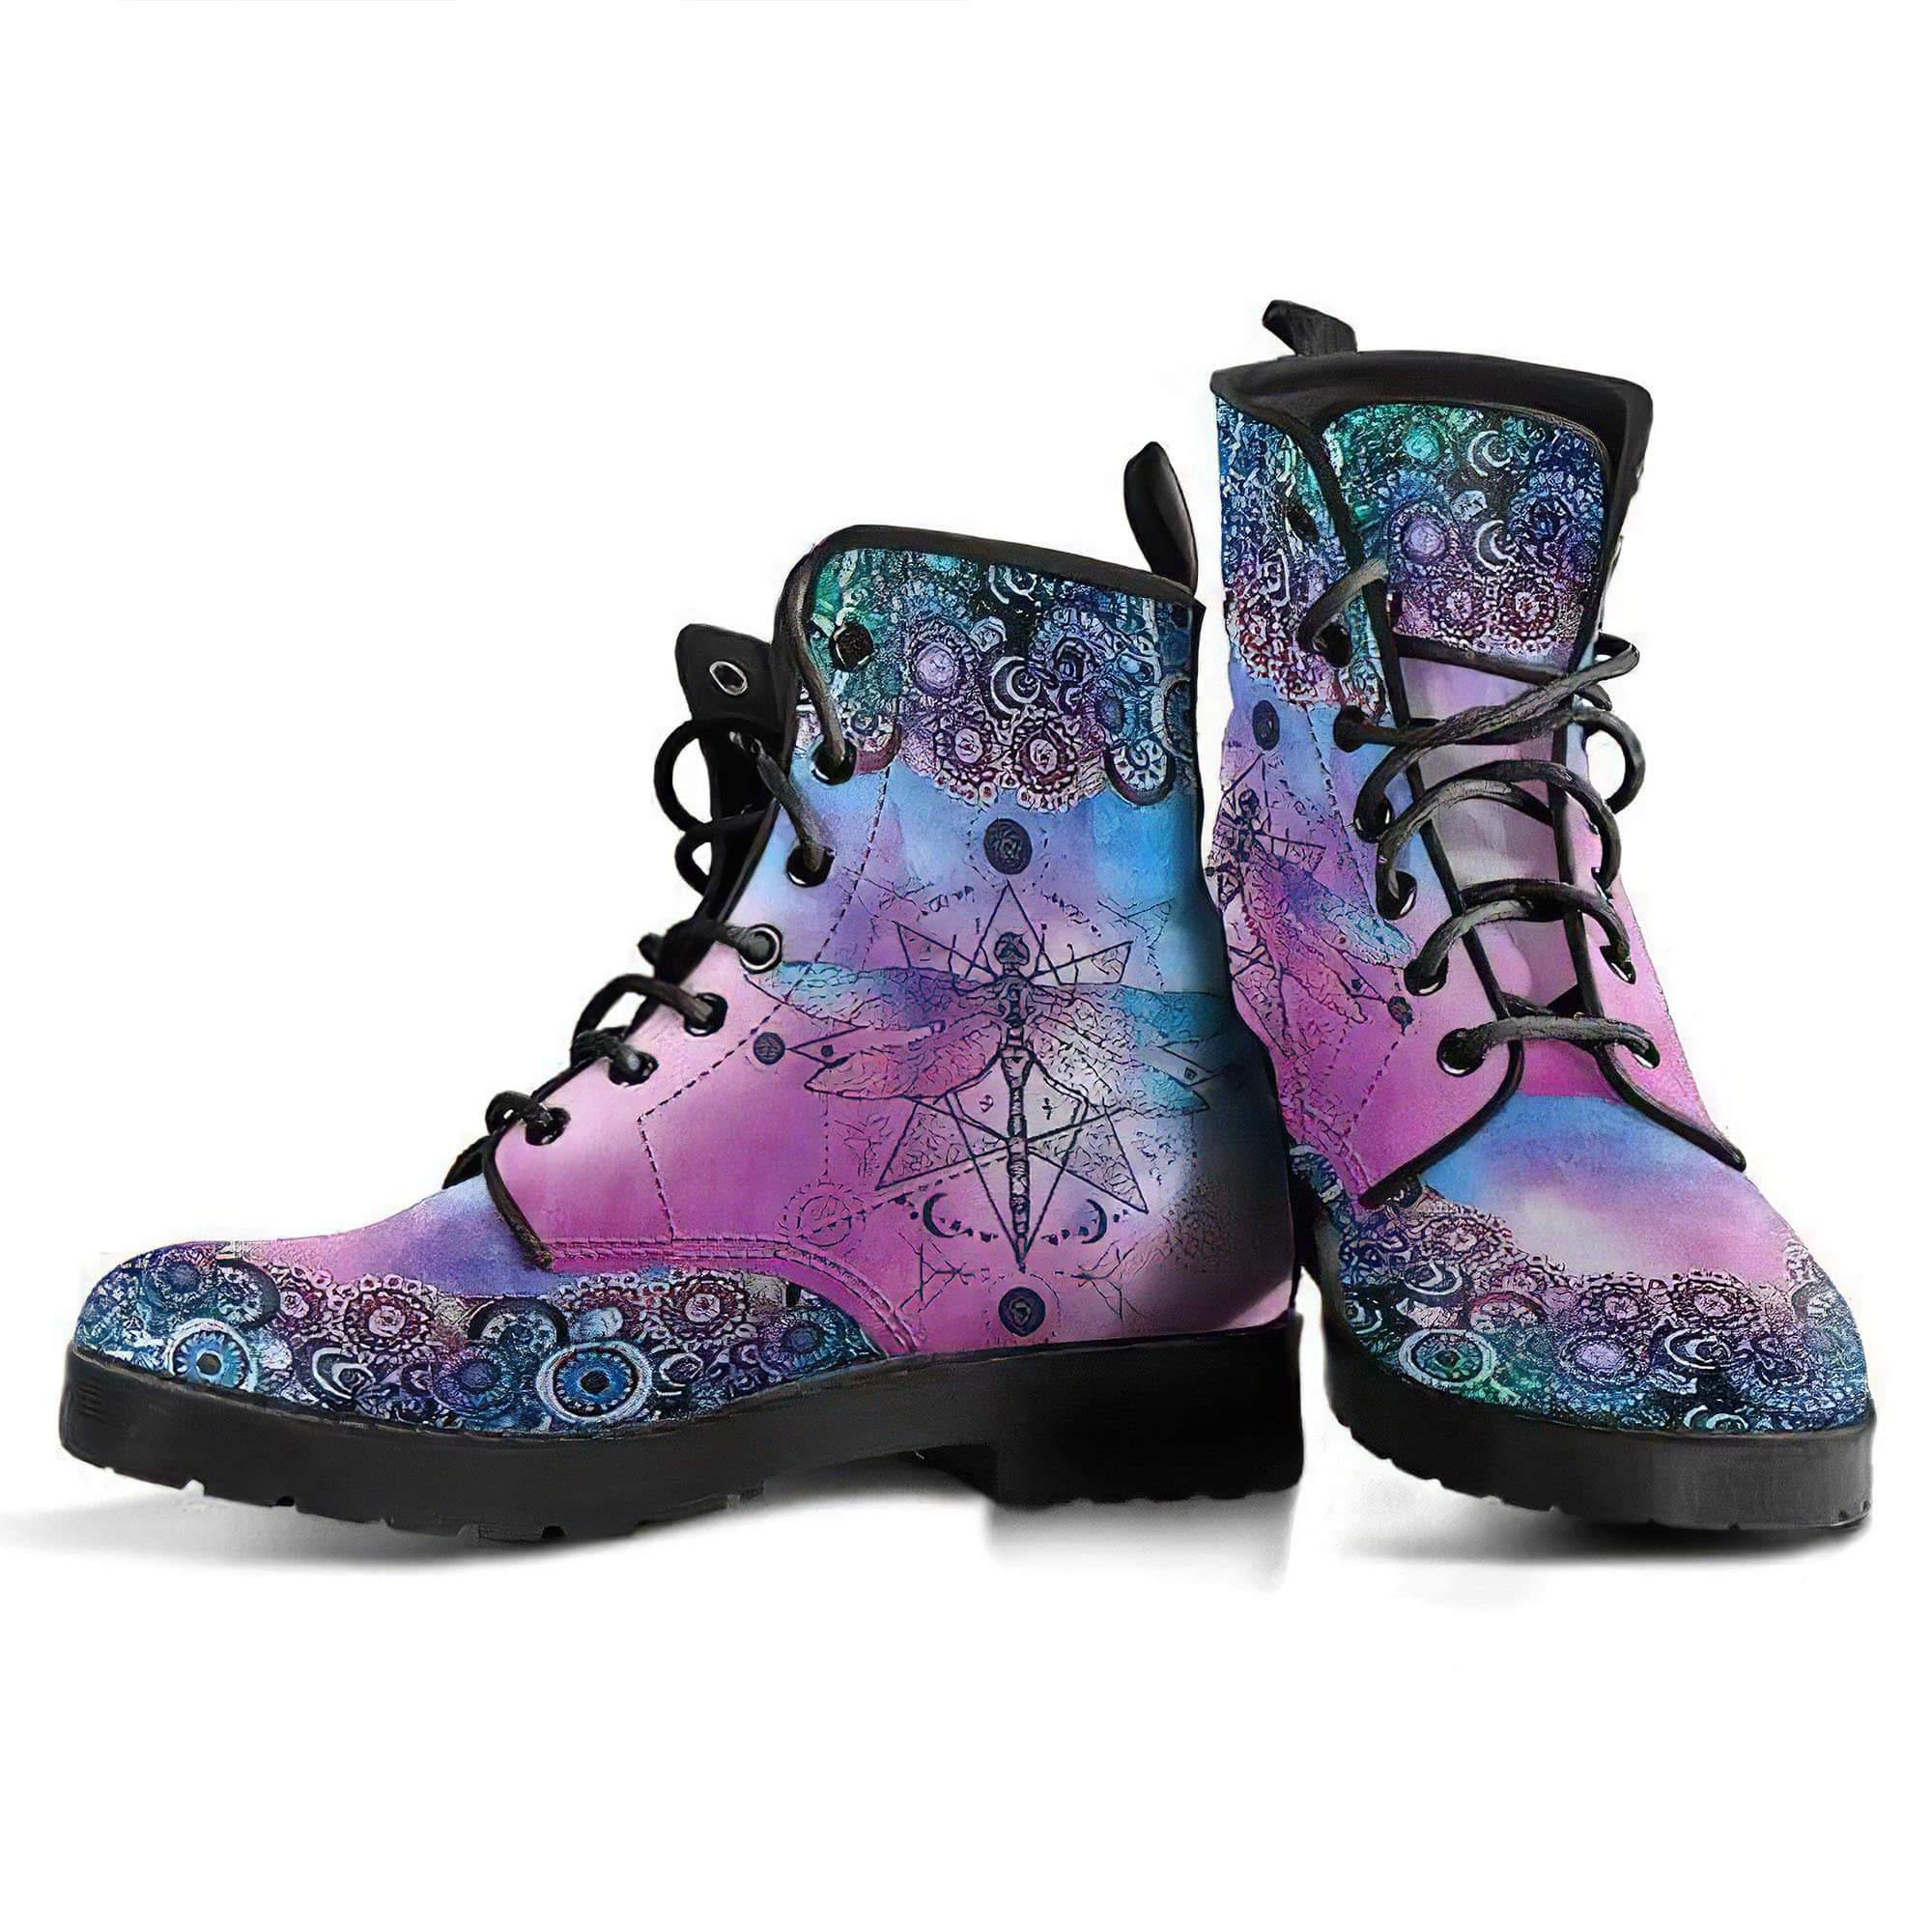 purple-dragonfly-handcrafted-boots-women-s-leather-boots-12051933364285.jpg